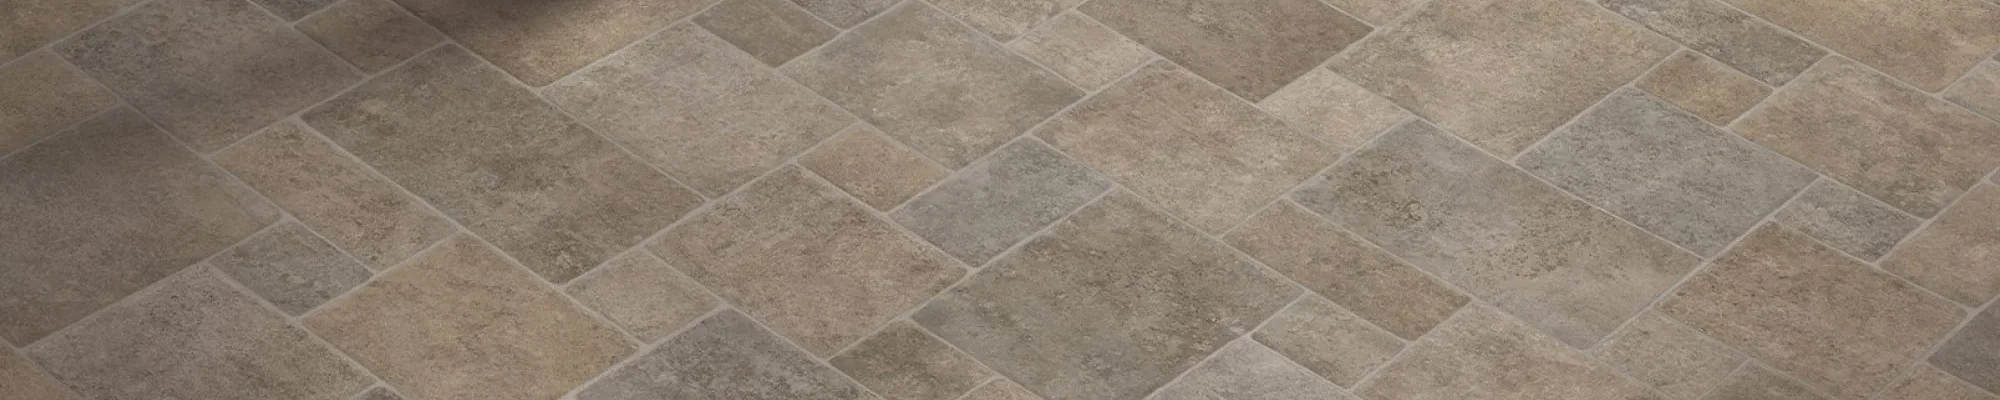 Find out more about tiling services with Genoa Custom Interiors , OH area